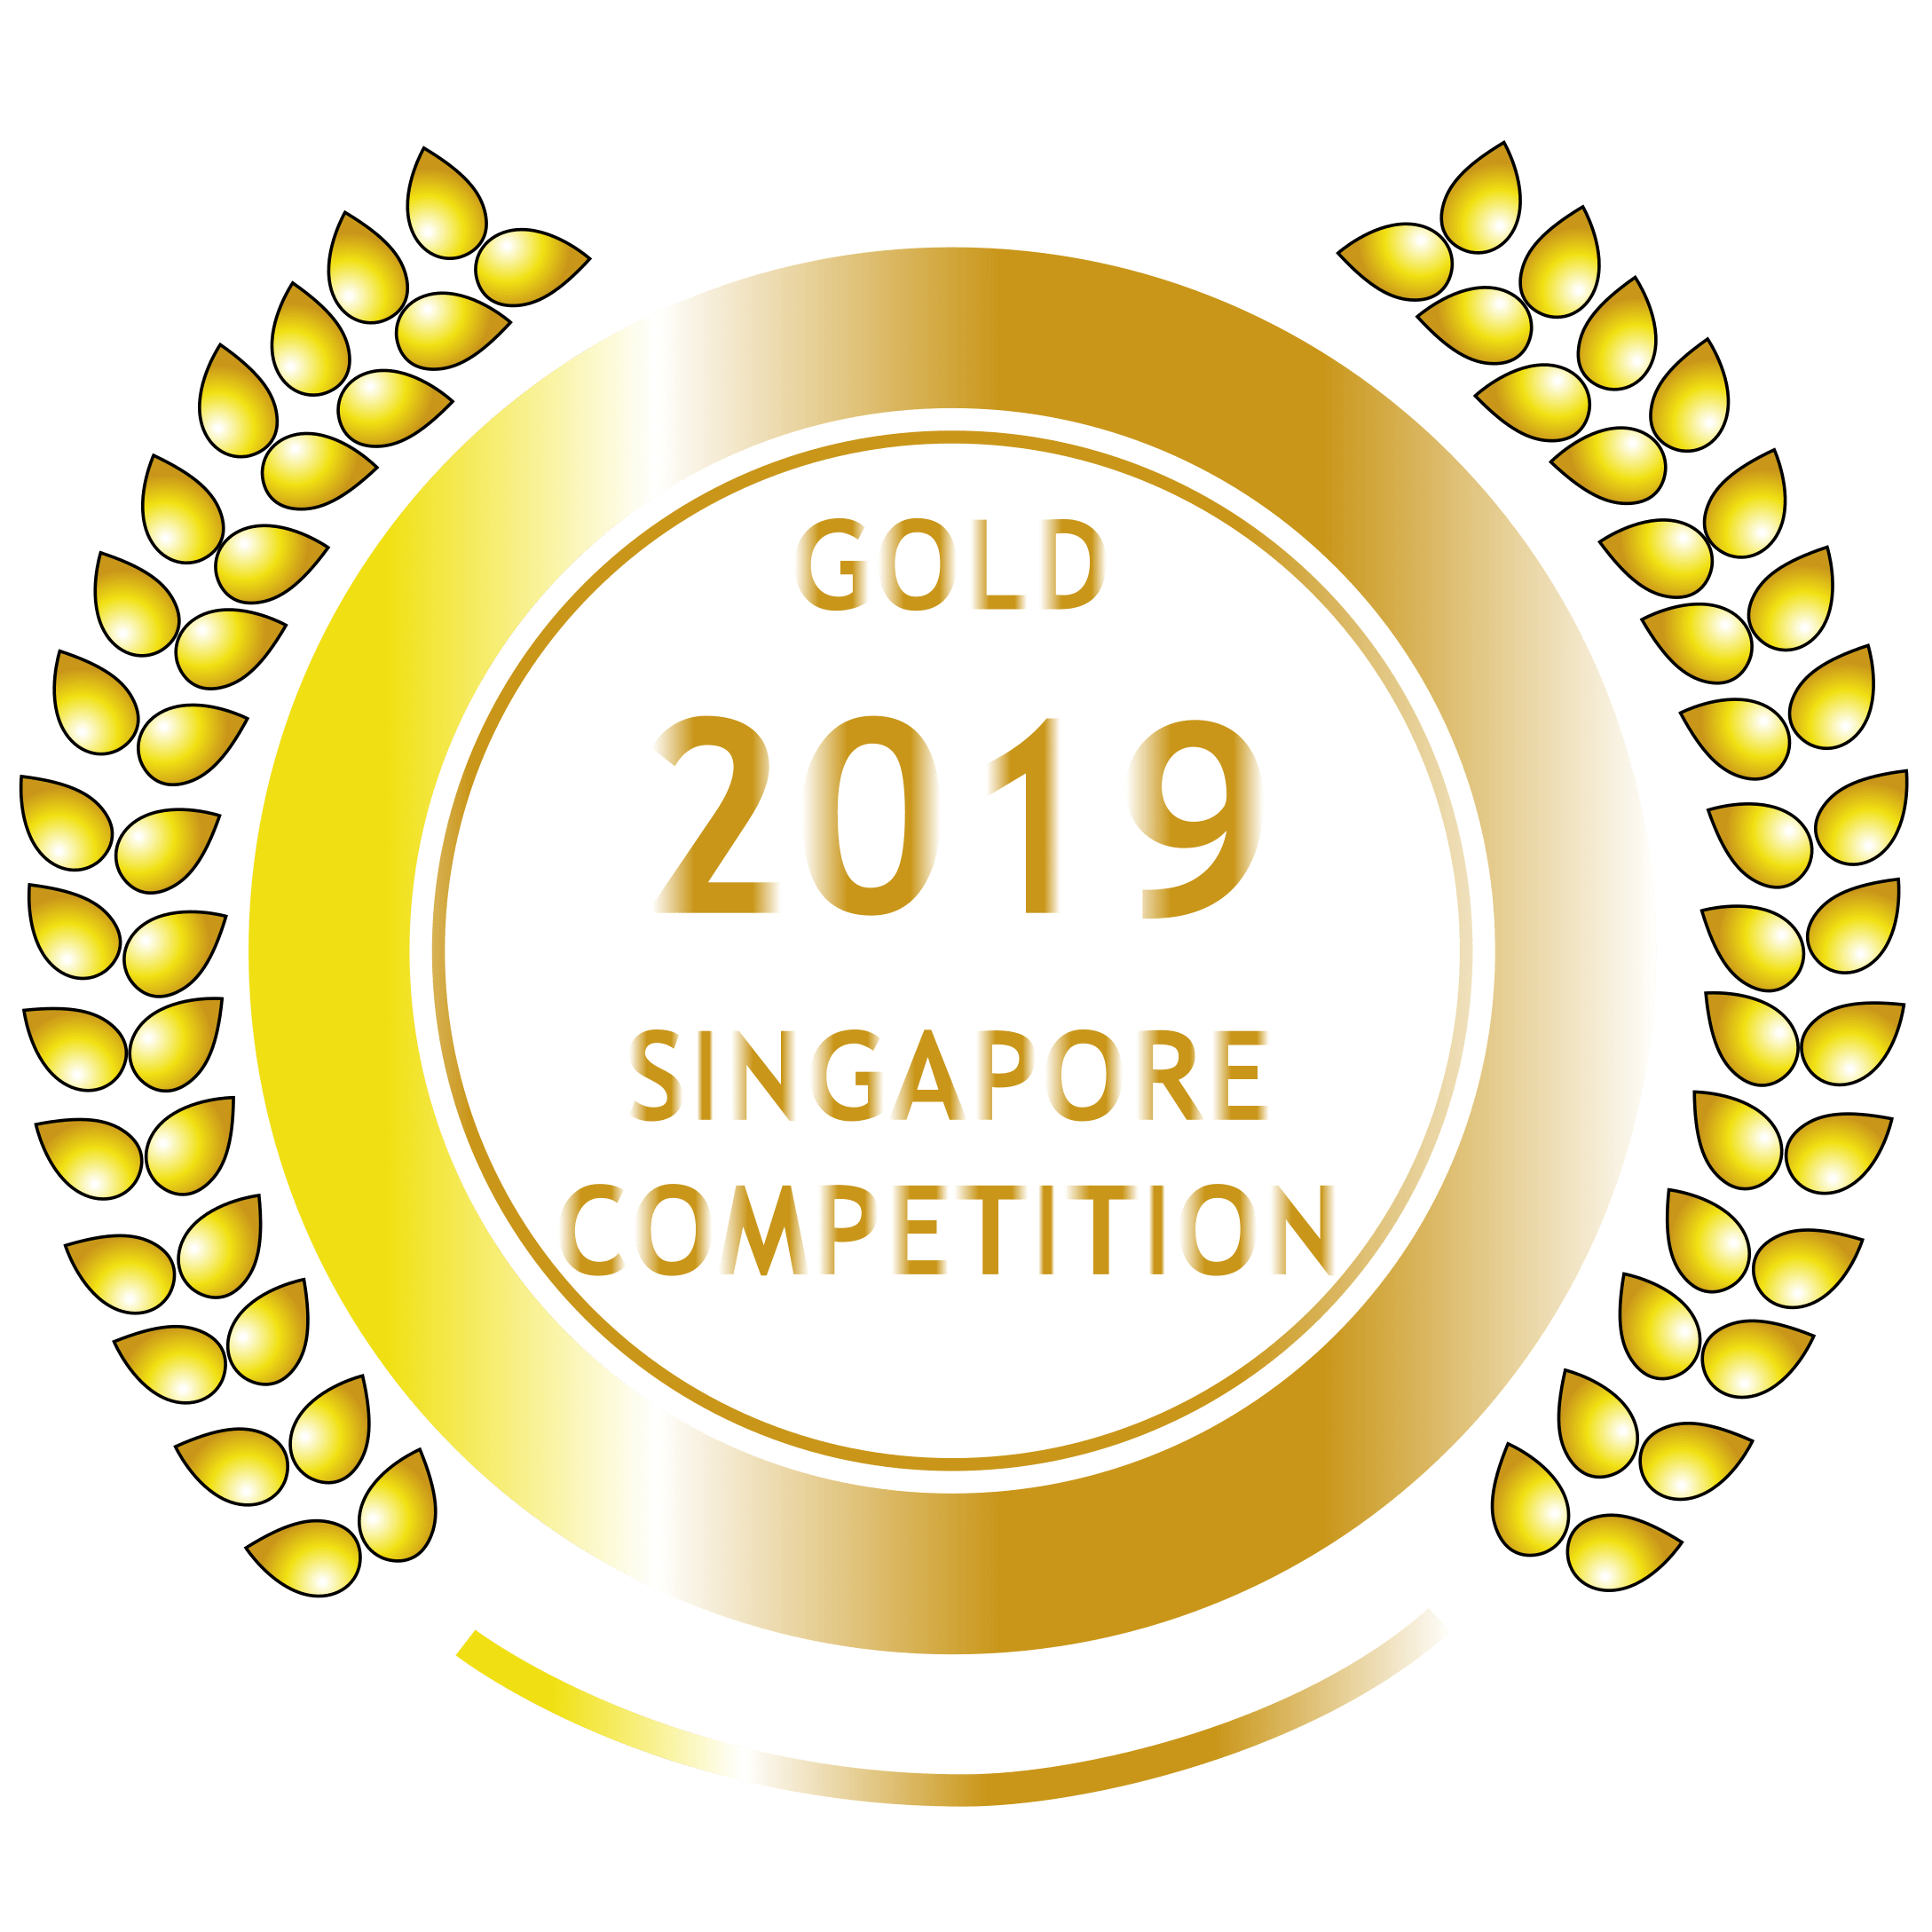 Singapore Competition: Gold 2019